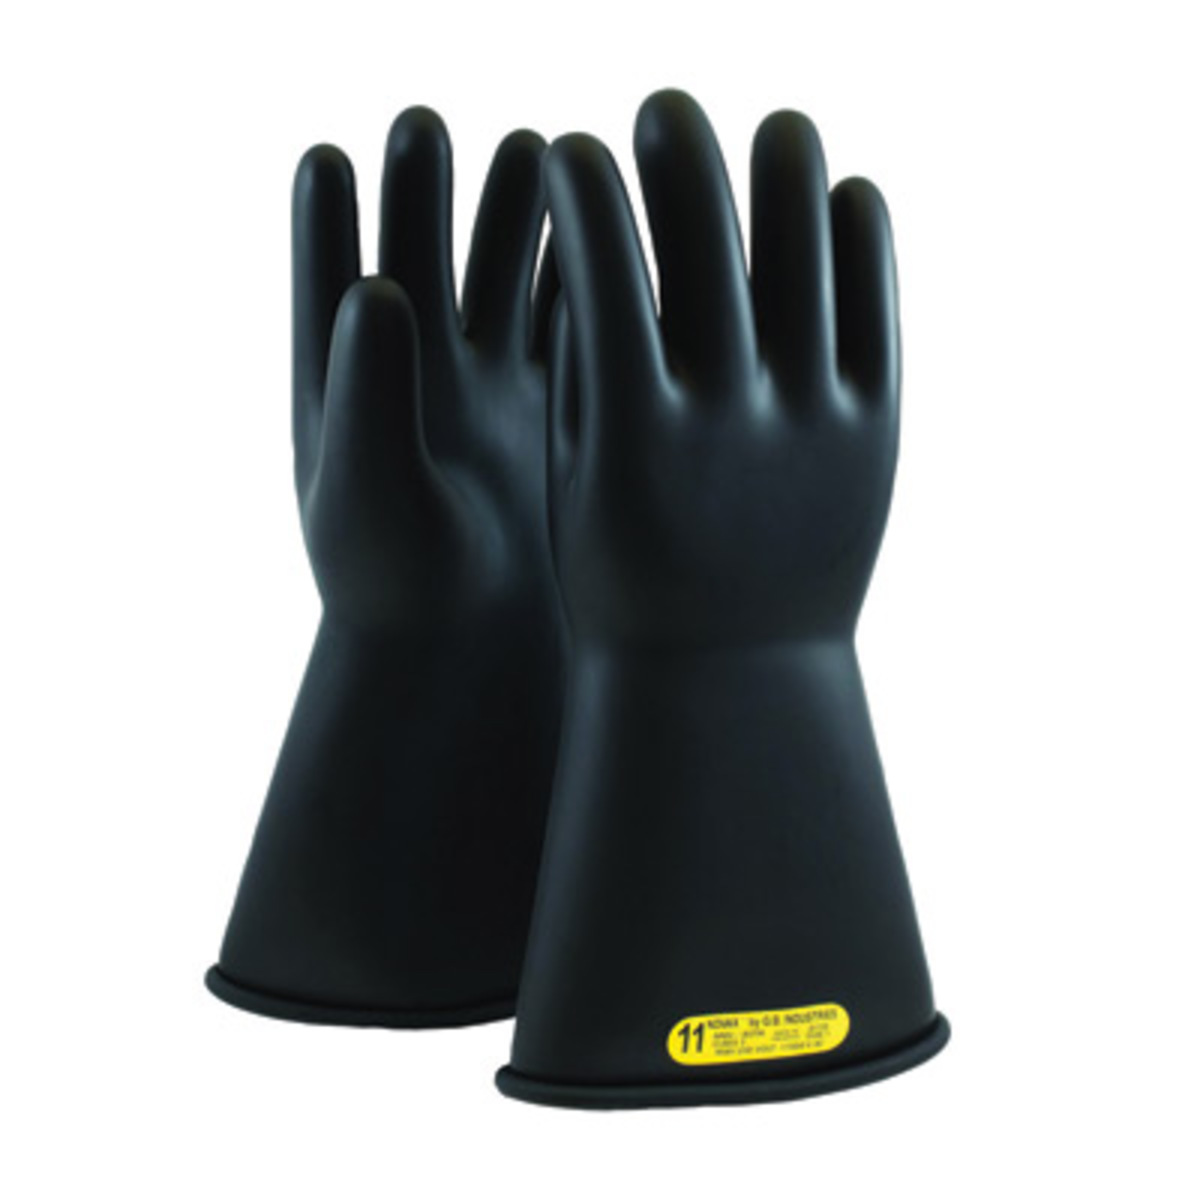 Linesmen Gloves for Sale online at autumn supply